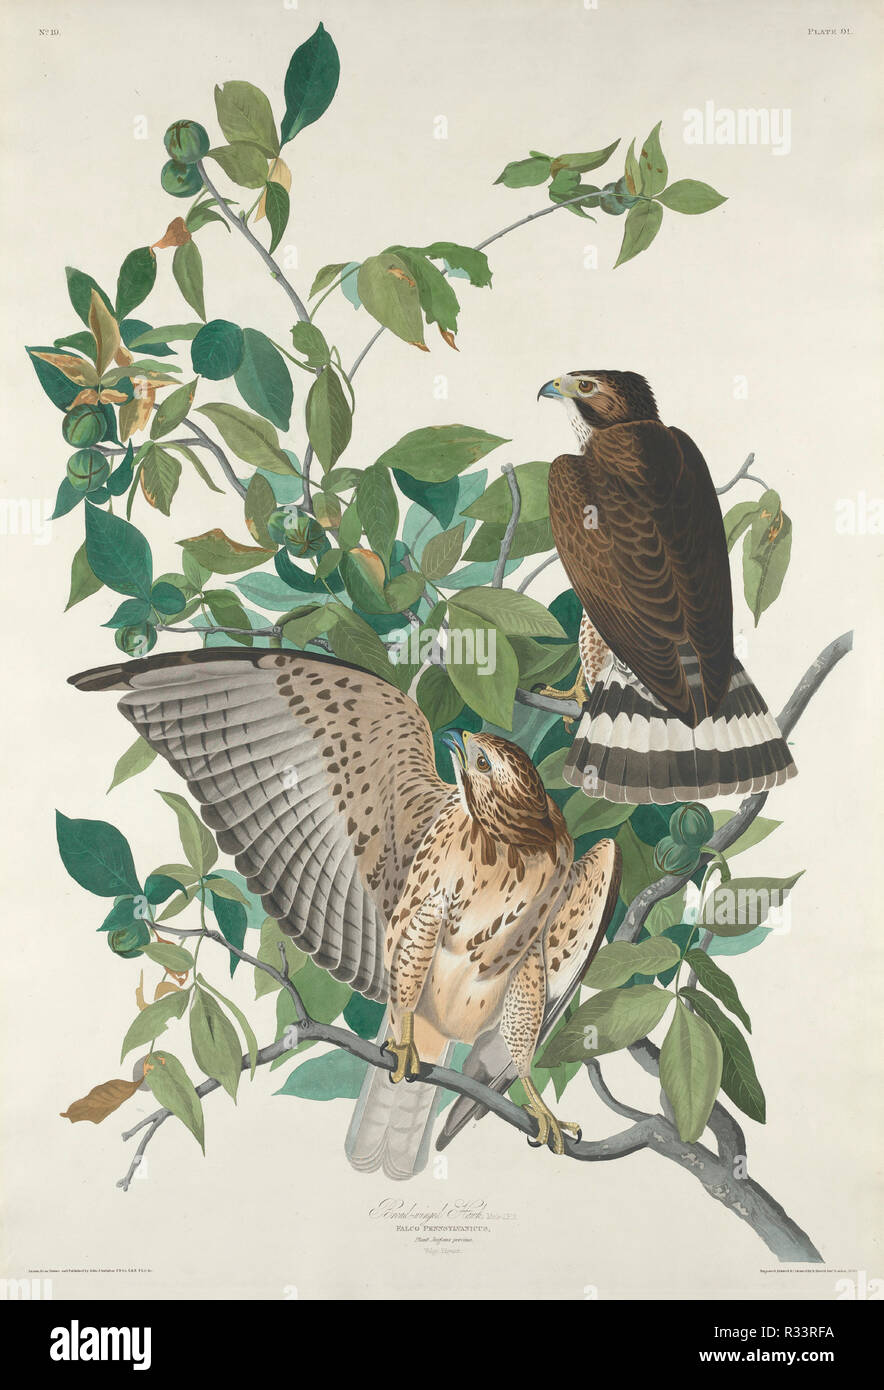 Broad-winged Hawk. Dated: 1830. Dimensions: plate: 96.2 x 65 cm (37 7/8 x 25 9/16 in.)  sheet: 100.7 x 67.8 cm (39 5/8 x 26 11/16 in.). Medium: hand-colored etching and aquatint on Whatman paper. Museum: National Gallery of Art, Washington DC. Author: Robert Havell after John James Audubon. Stock Photo